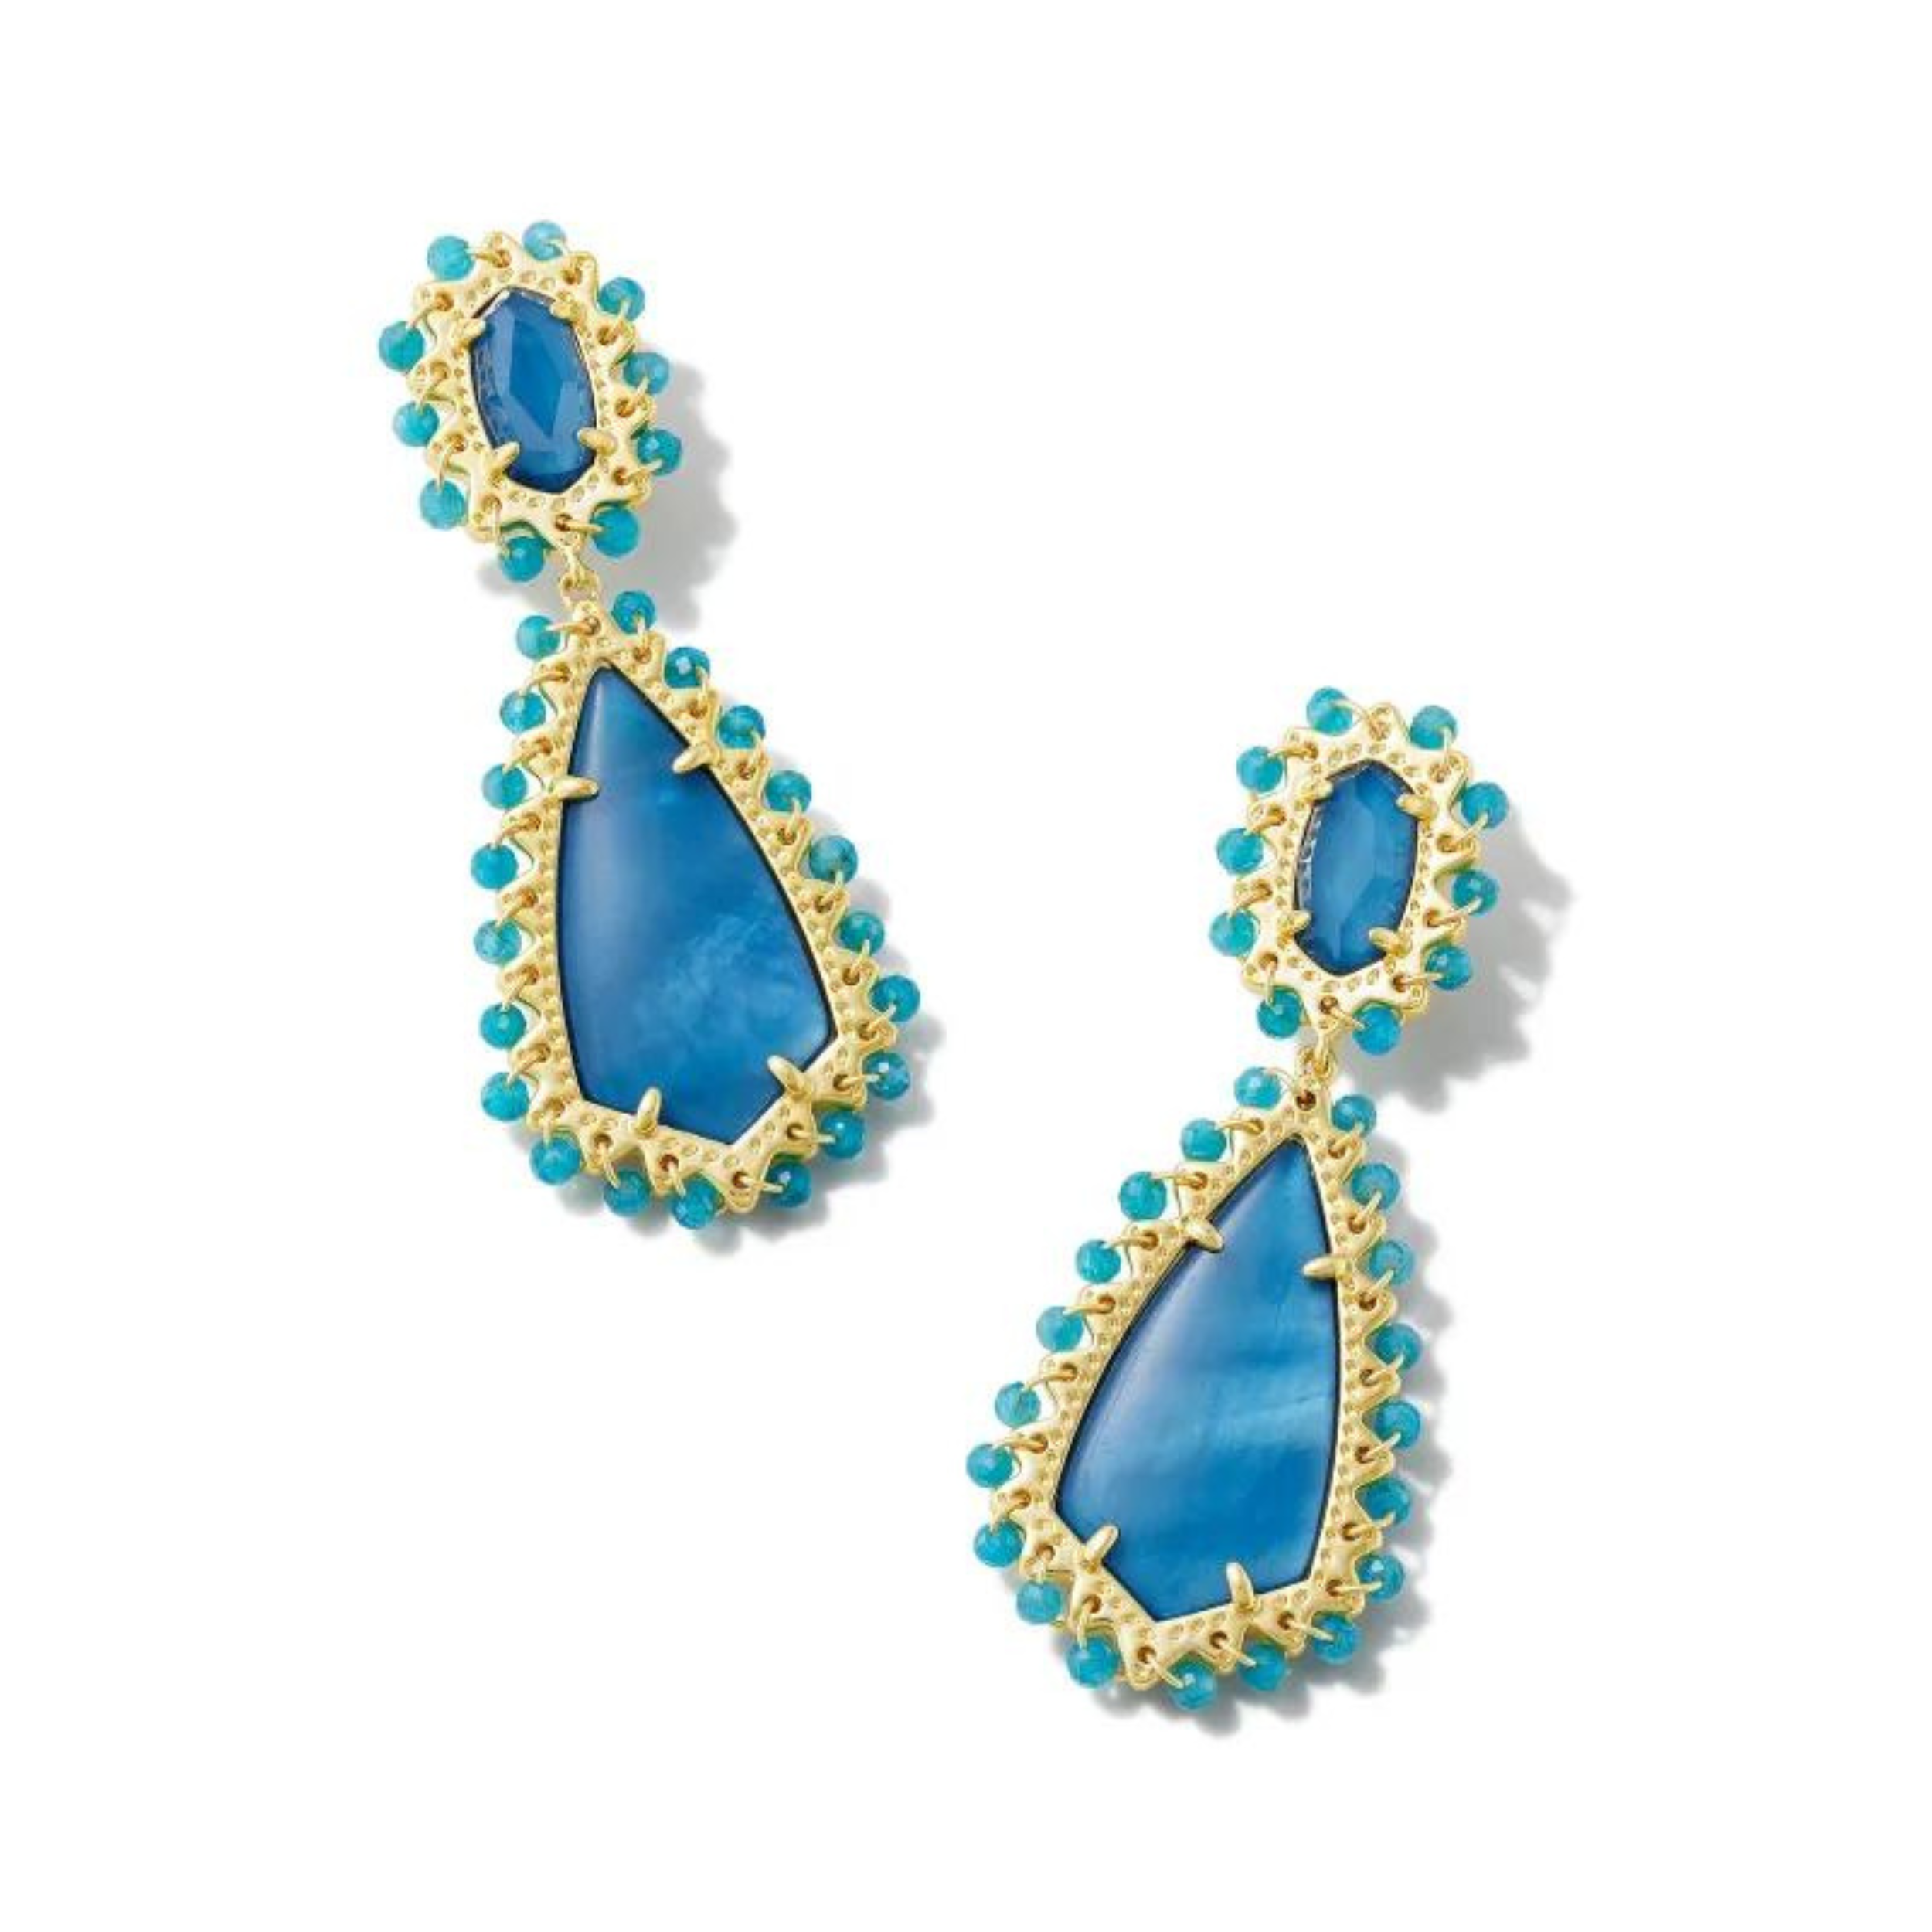 Gold post dangle earrings with a blue mix stone with a blue beaded trim, pictured on a white background.